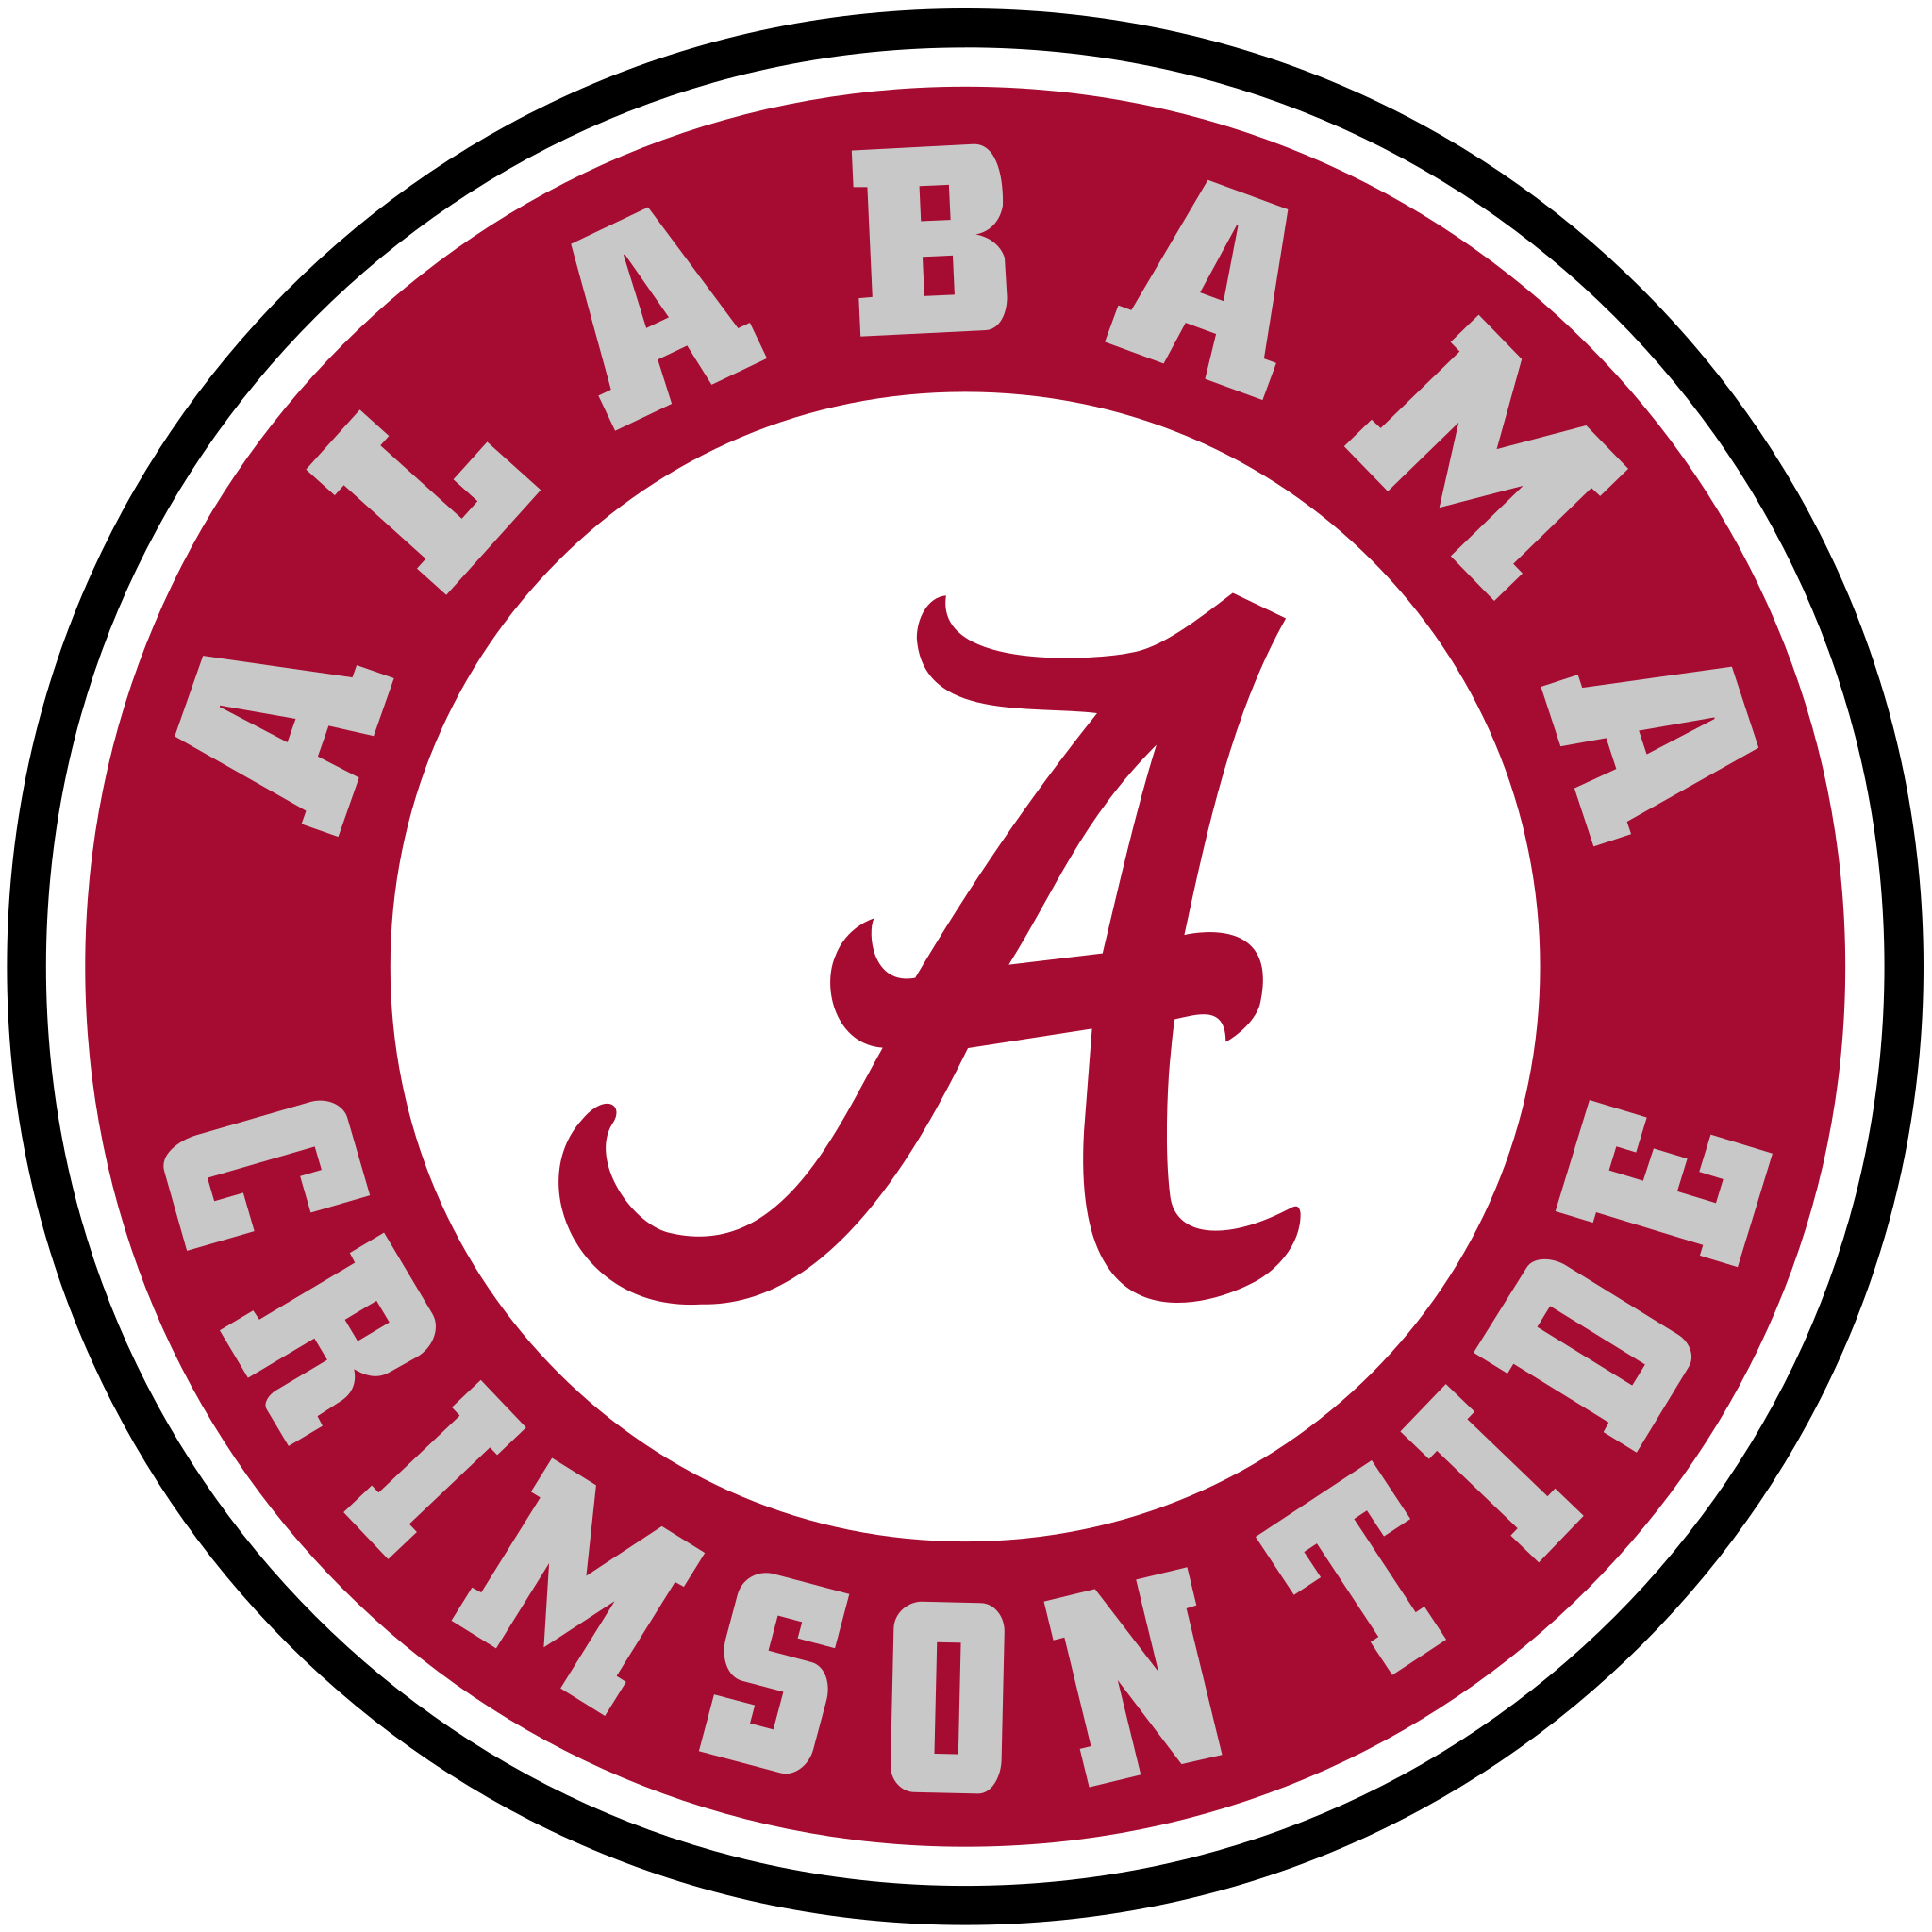 SAD NEWS: the alabama crimson tide his suspended their superstar player due to……